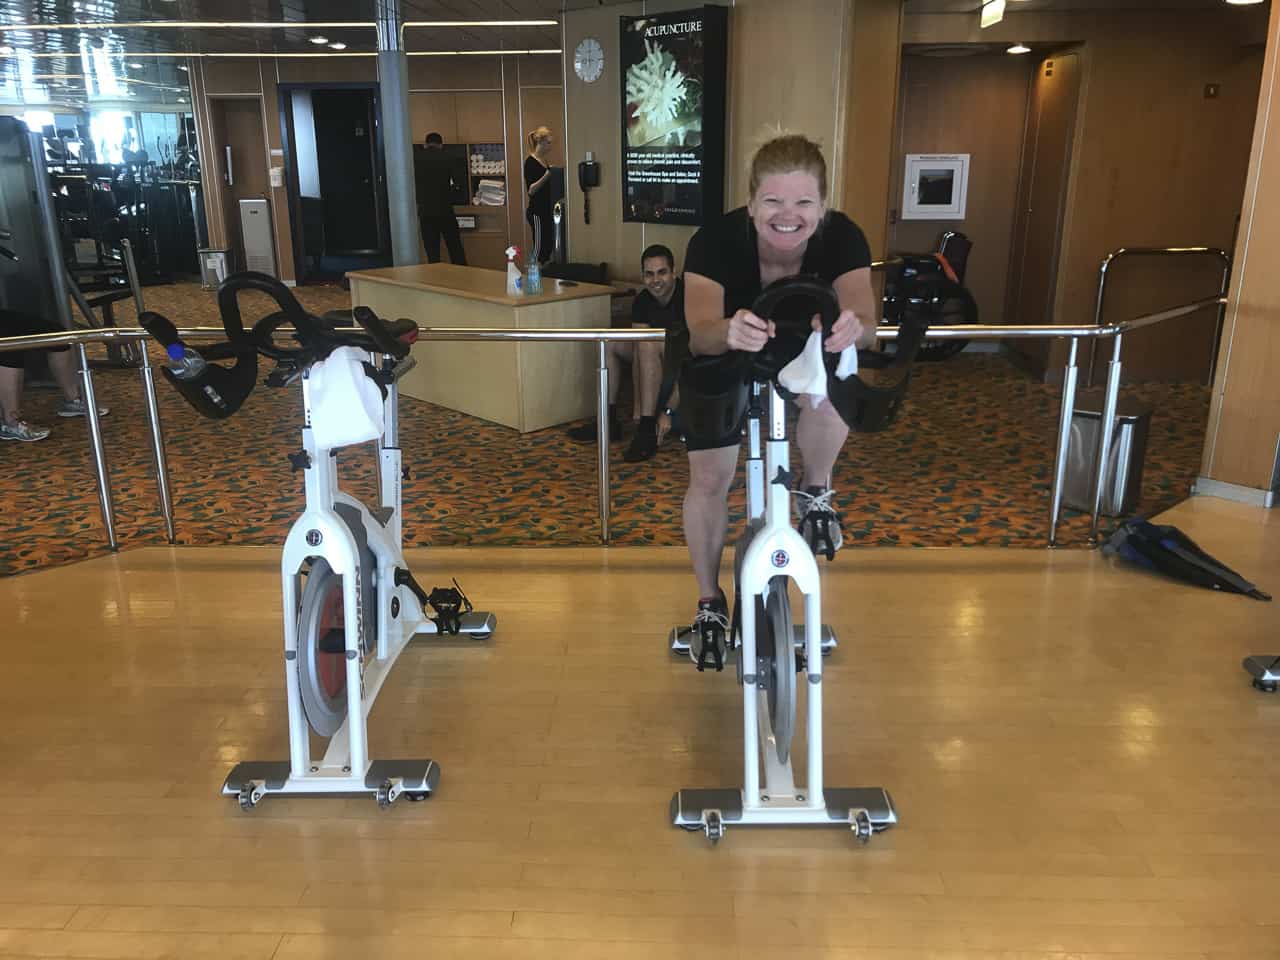 South-Pacific-Cruise-HAL-Spin-class